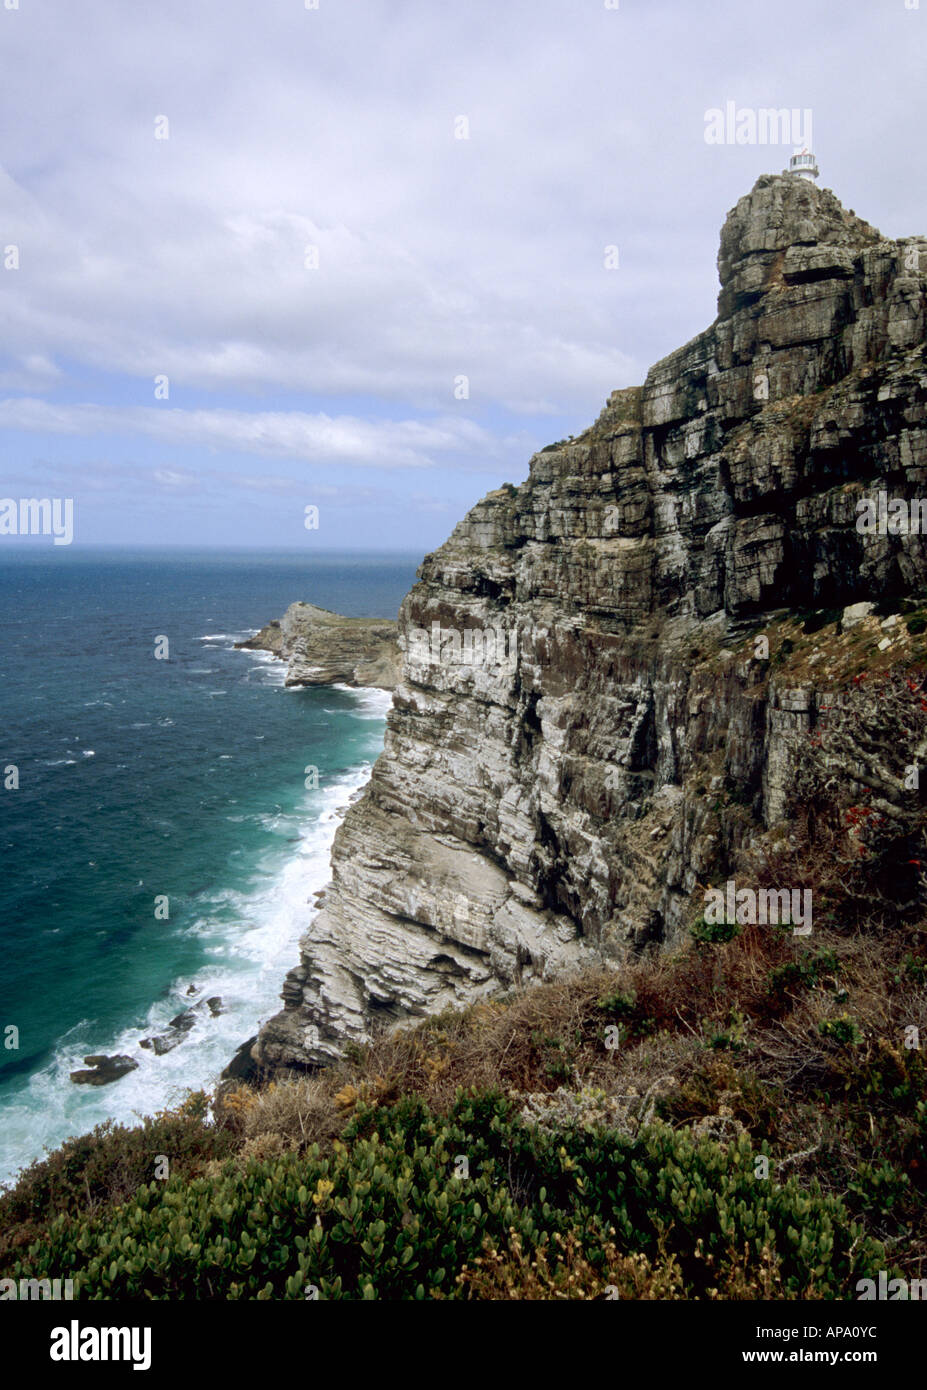 Cape Town, South Africa, beautiful landscape, beach, rugged granite cliffs of Cape Point, Table Mountain National Park, UNESCO, African landscapes Stock Photo